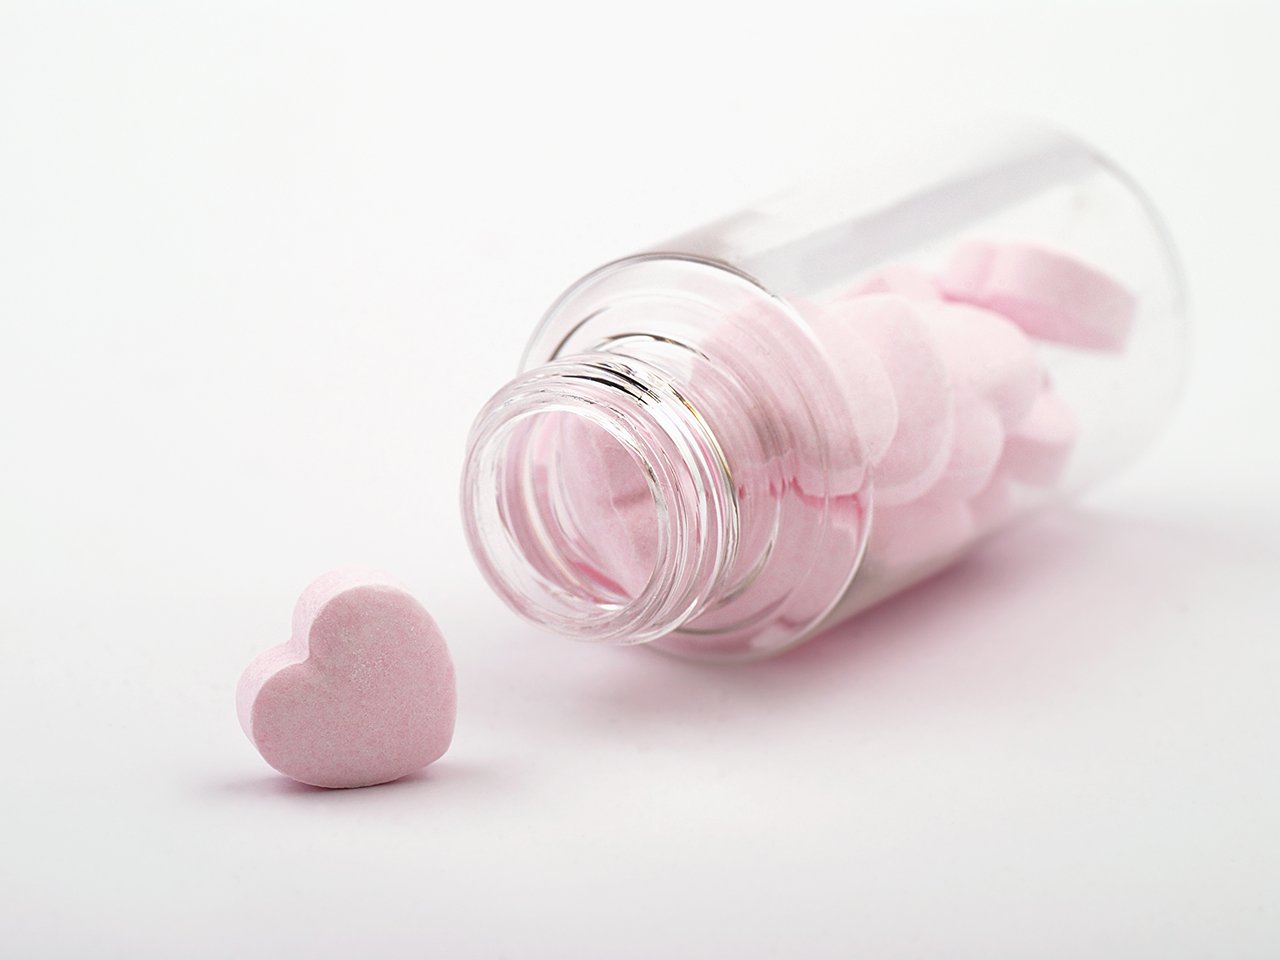 A heart-shaped pill in a clear bottle, representing sex supplements for women